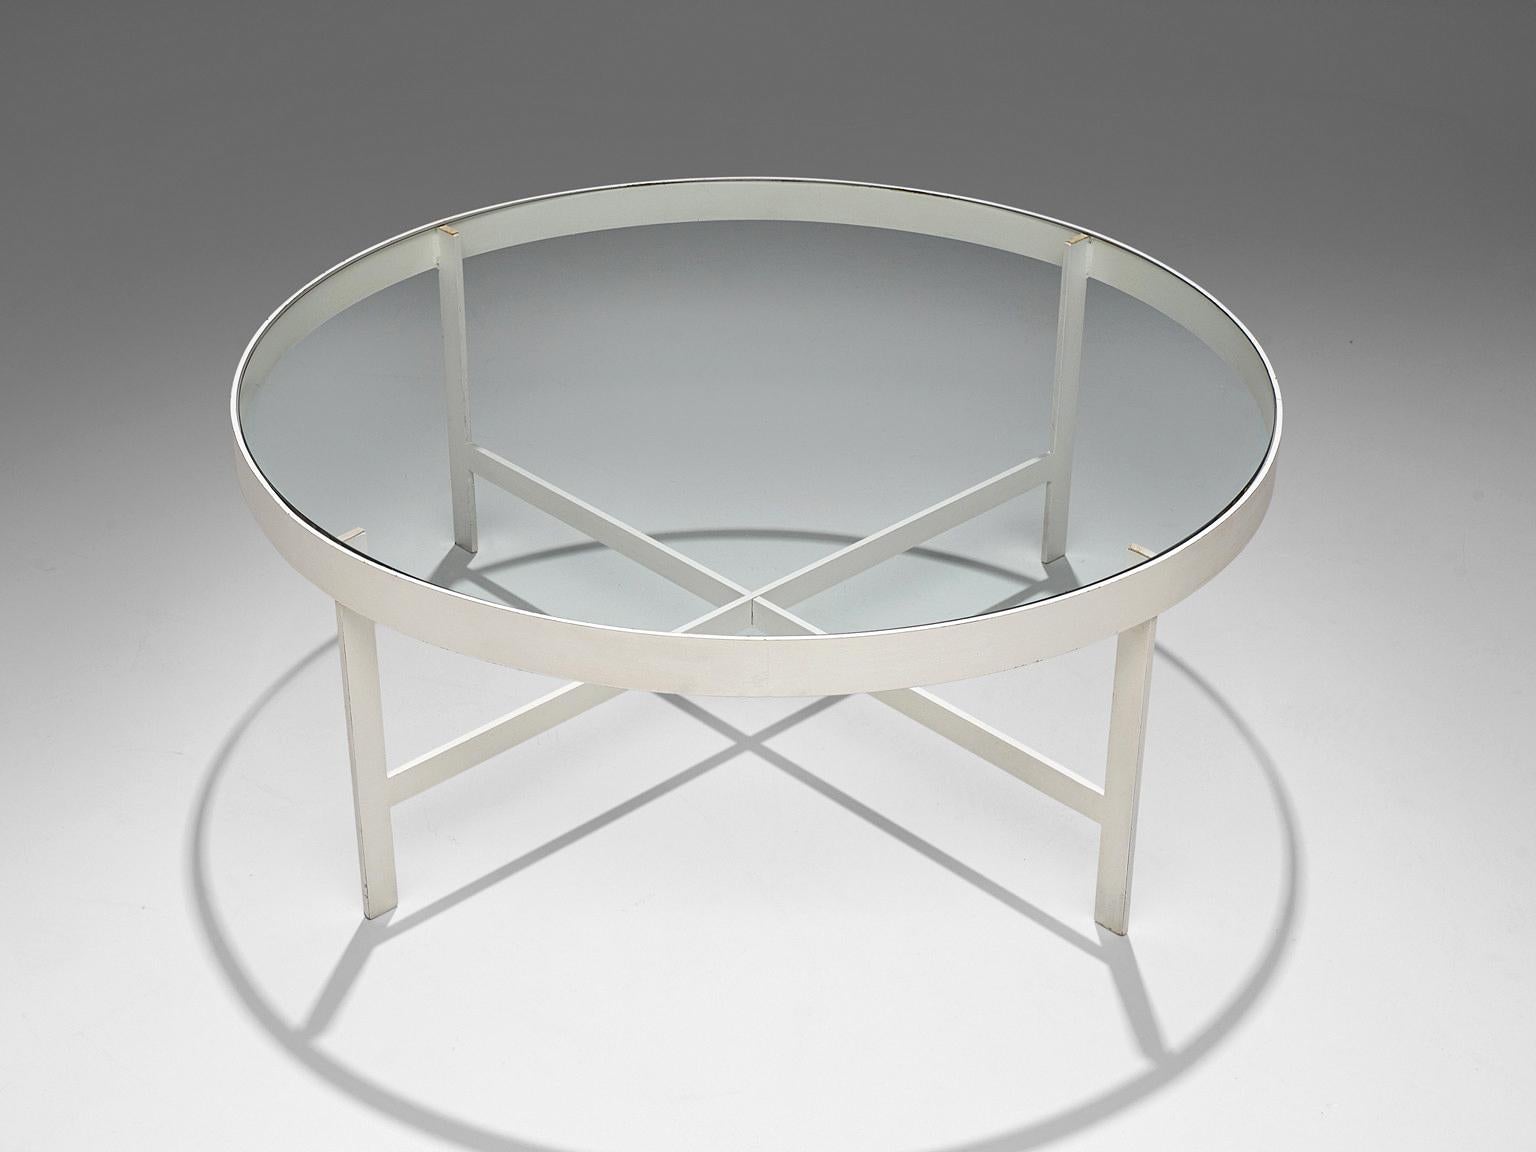 Janni Van Pelt, coffee table, glass, steel, The Netherlands, circa 1958. 

Round coffee table in white coated steel and glass. This table is a variation on Janni Van Pelt's 'G4' model. The base consists of four metal legs with a cross-connection.